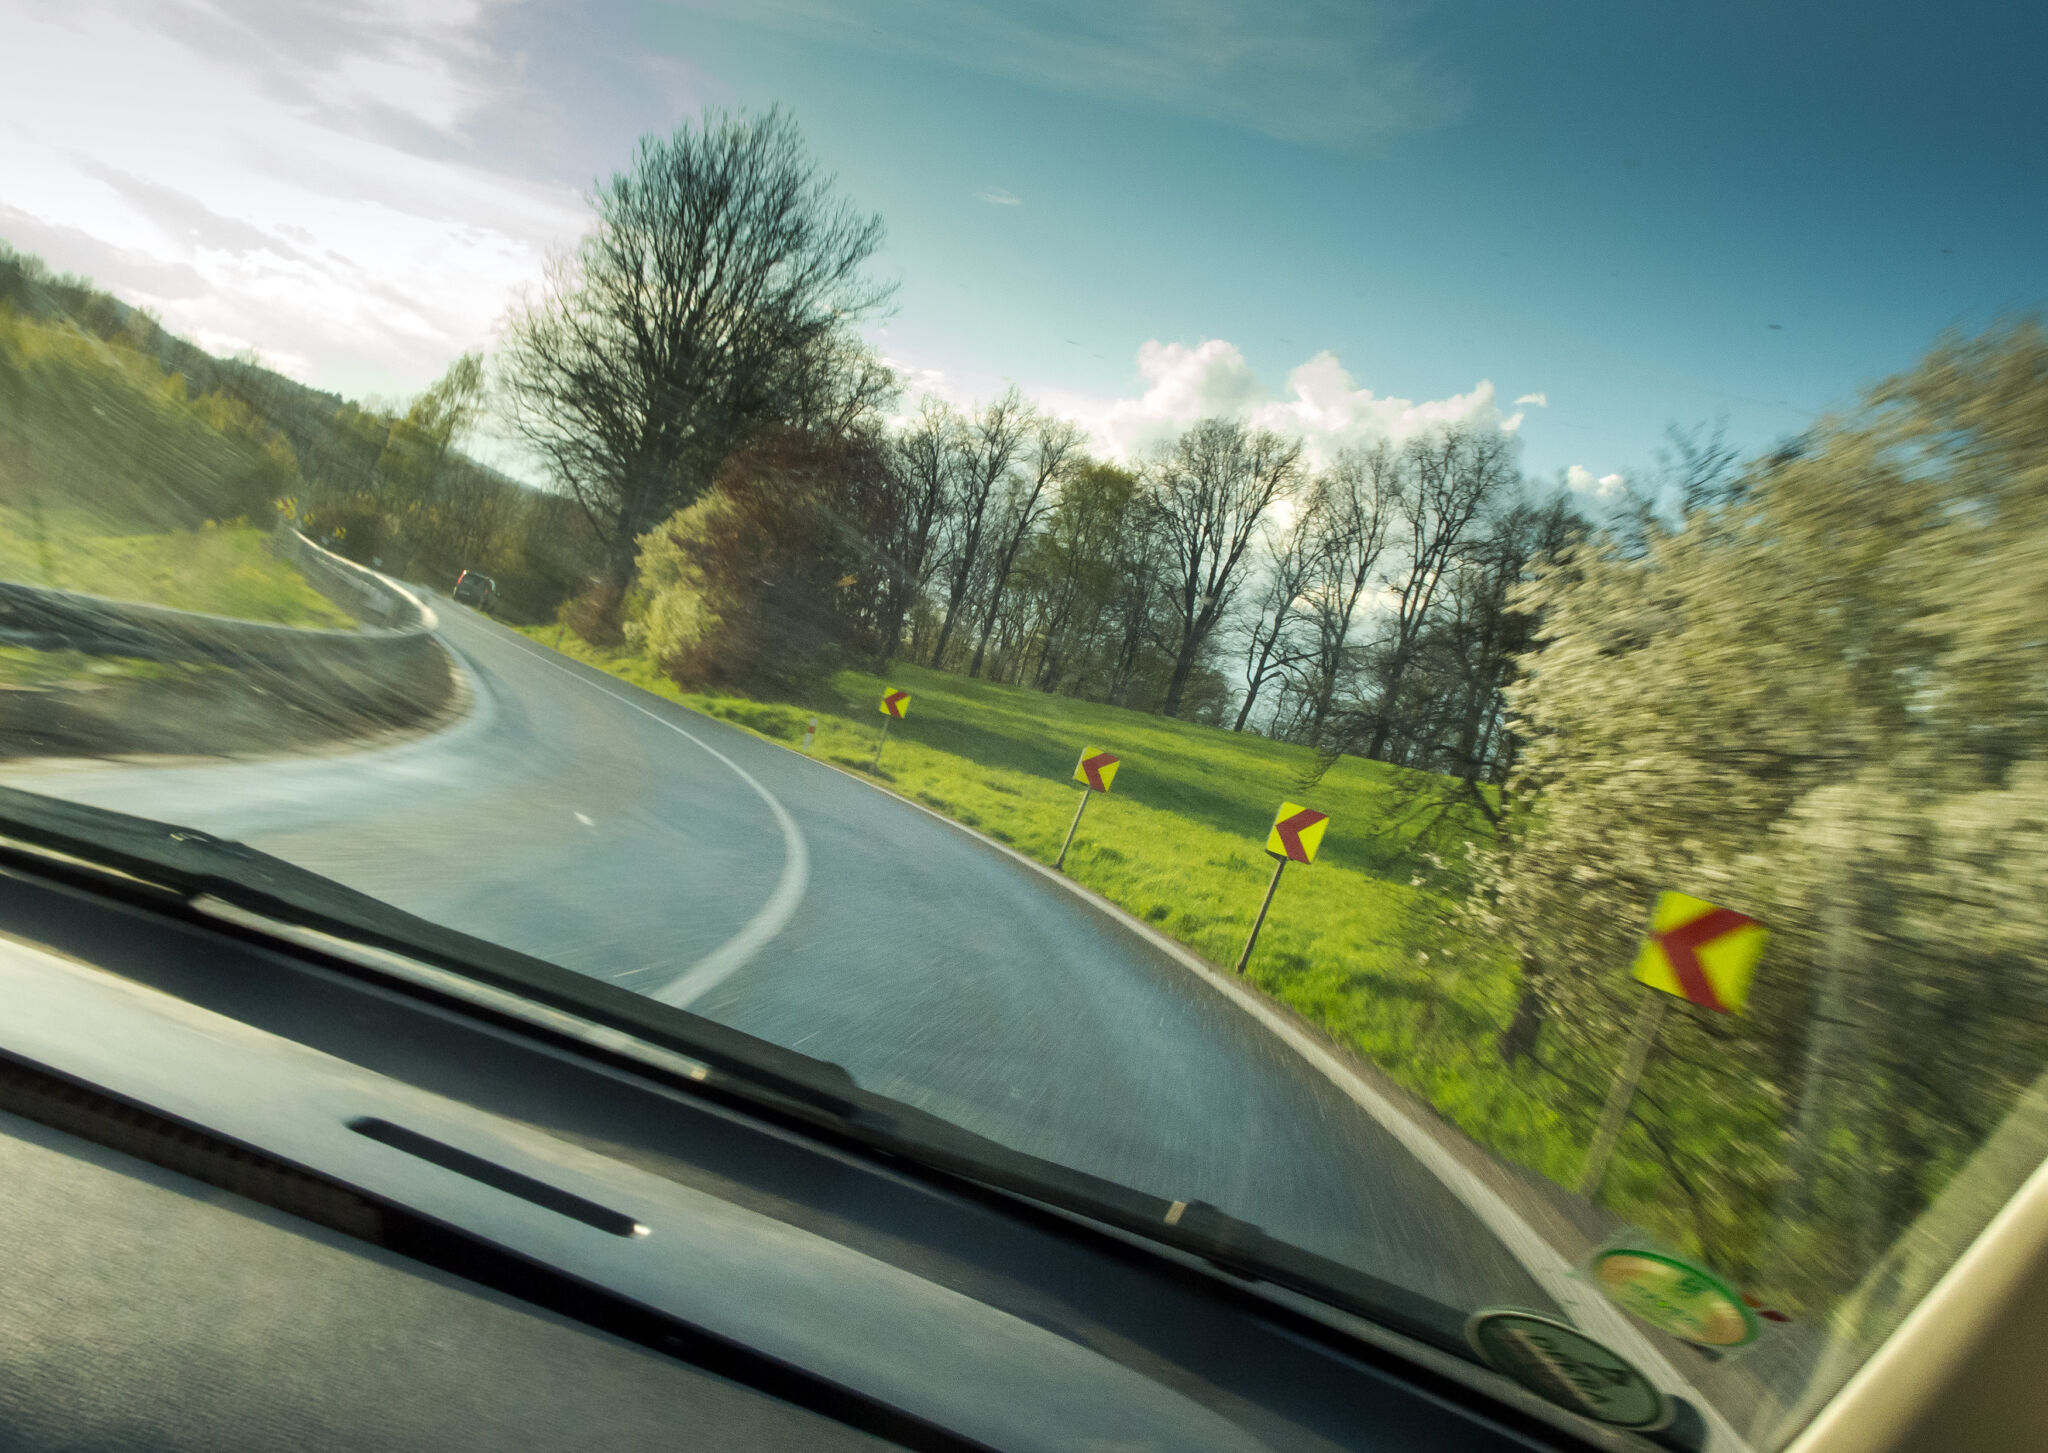 View from a fast-moving car in the curve | Free Stock Photo | LibreShot